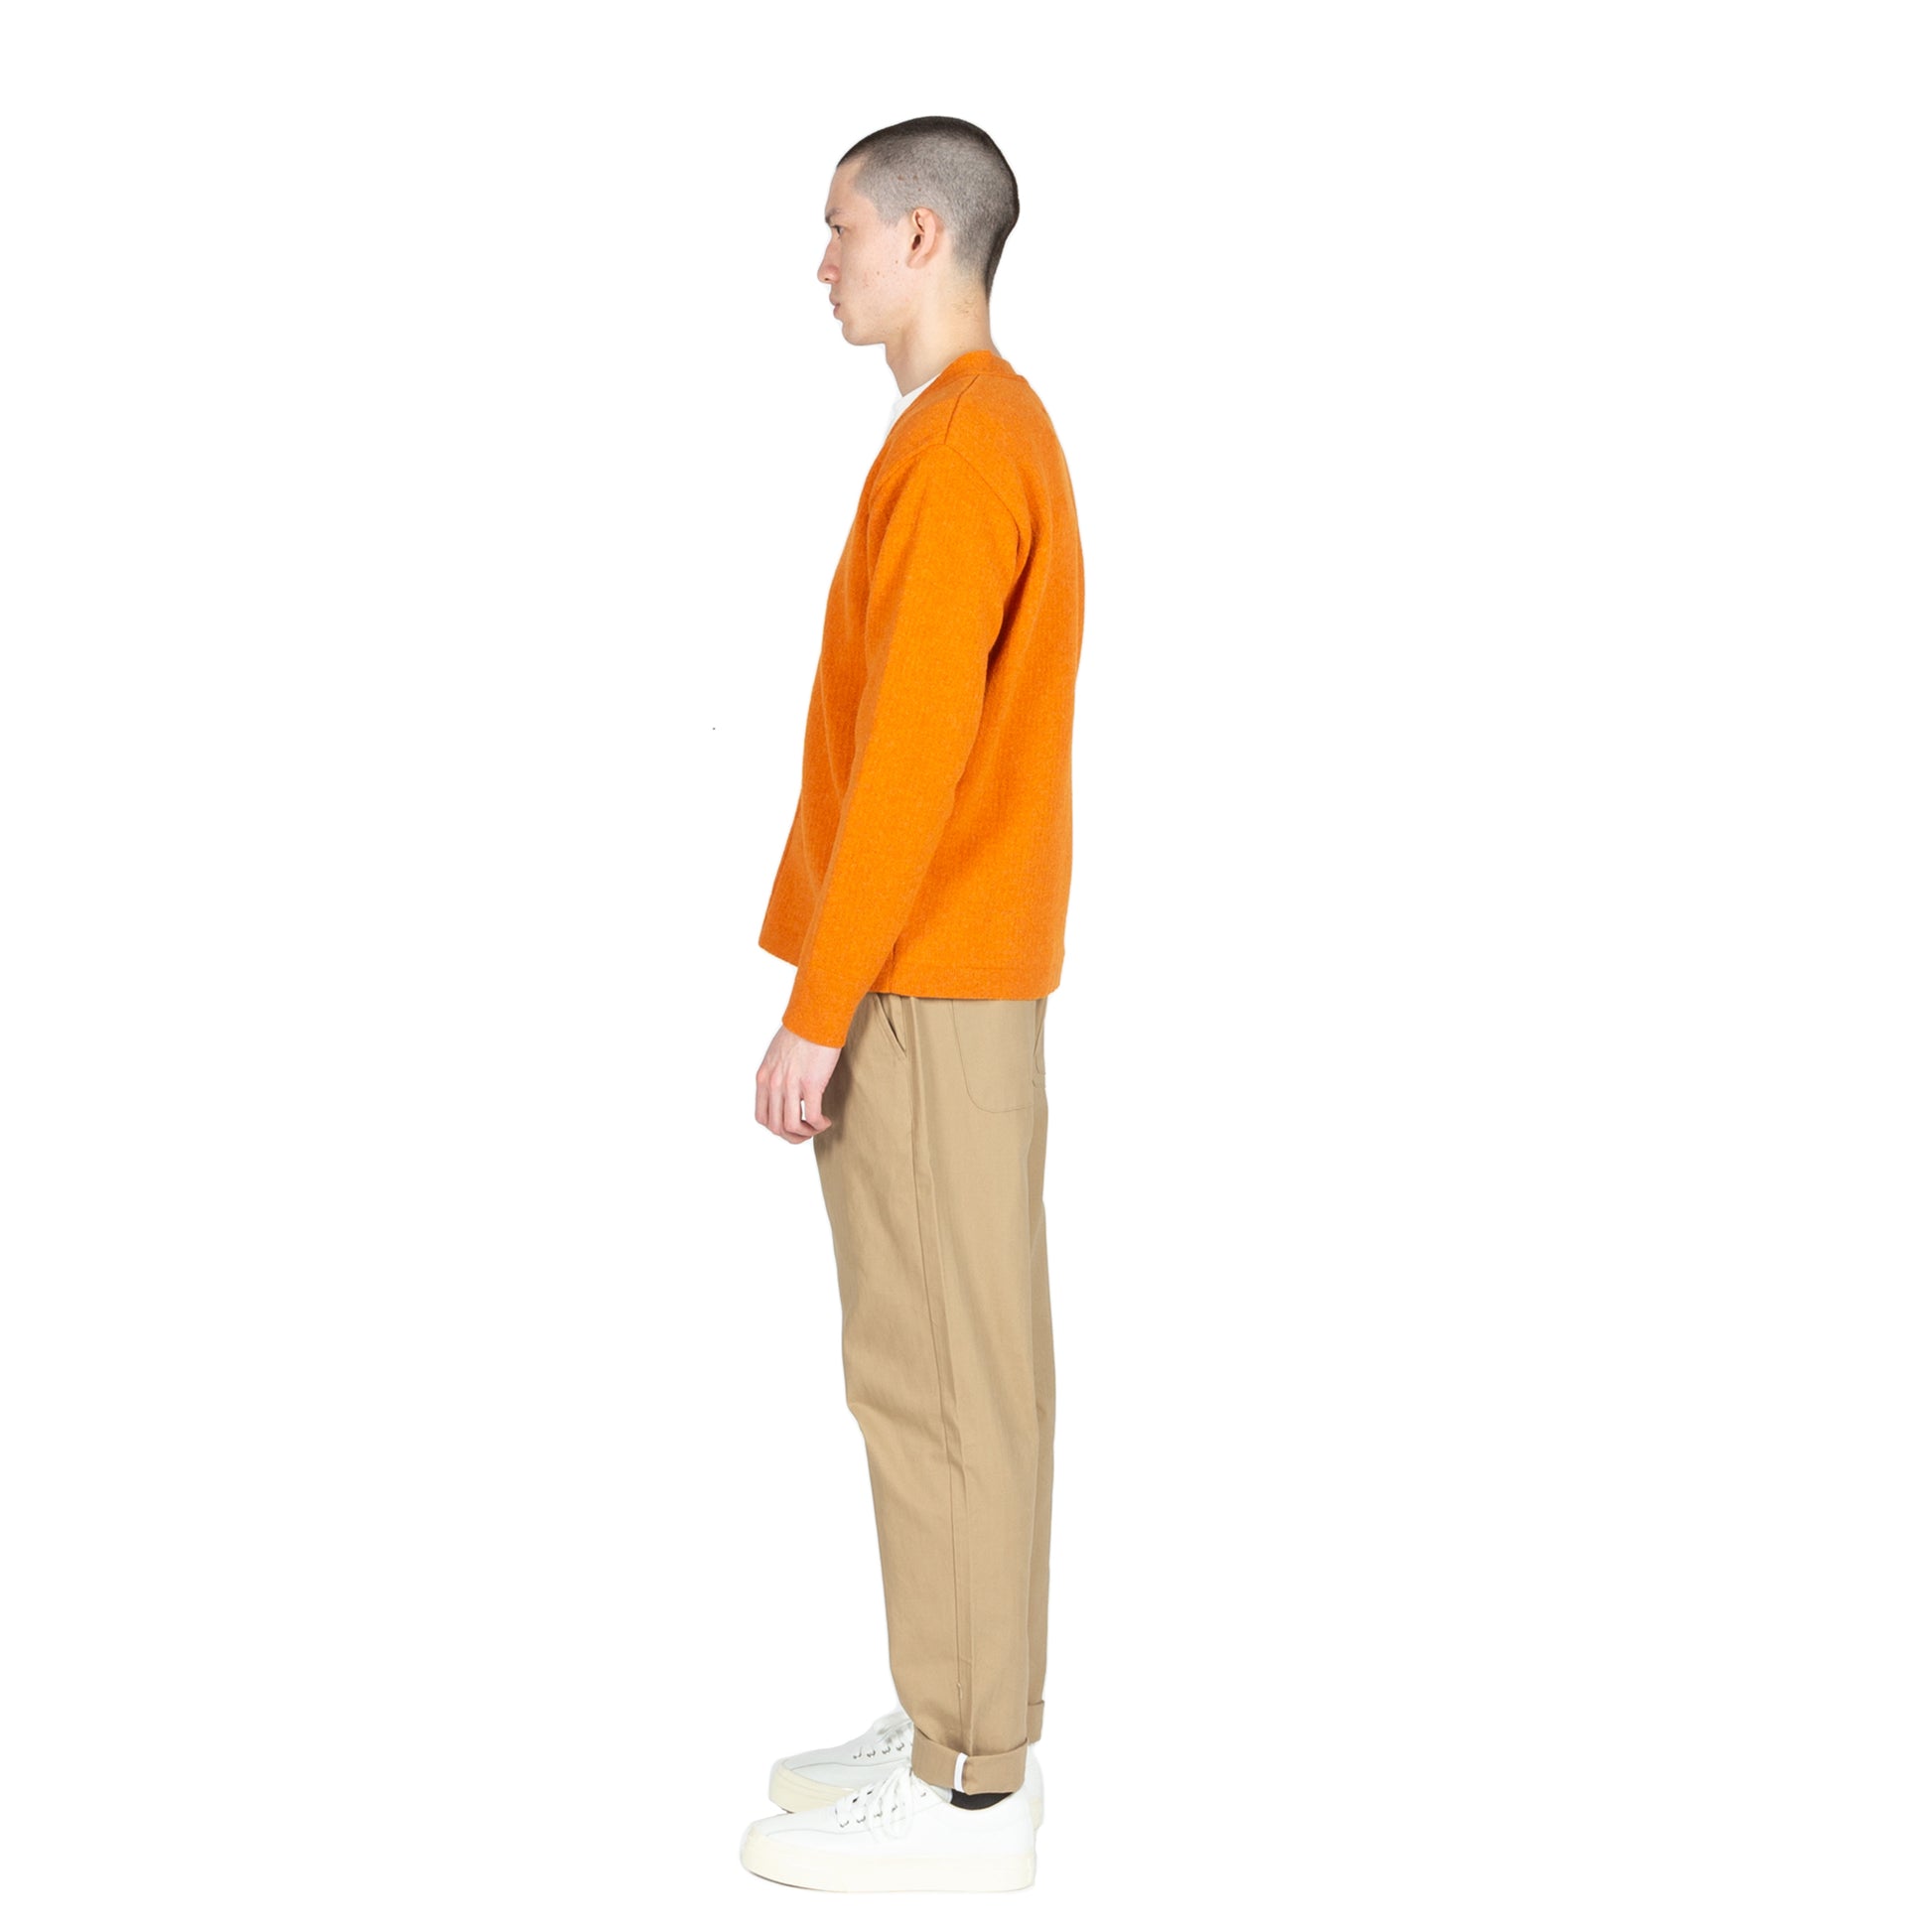 The English Difference Cardigan in Orange by Garbstore